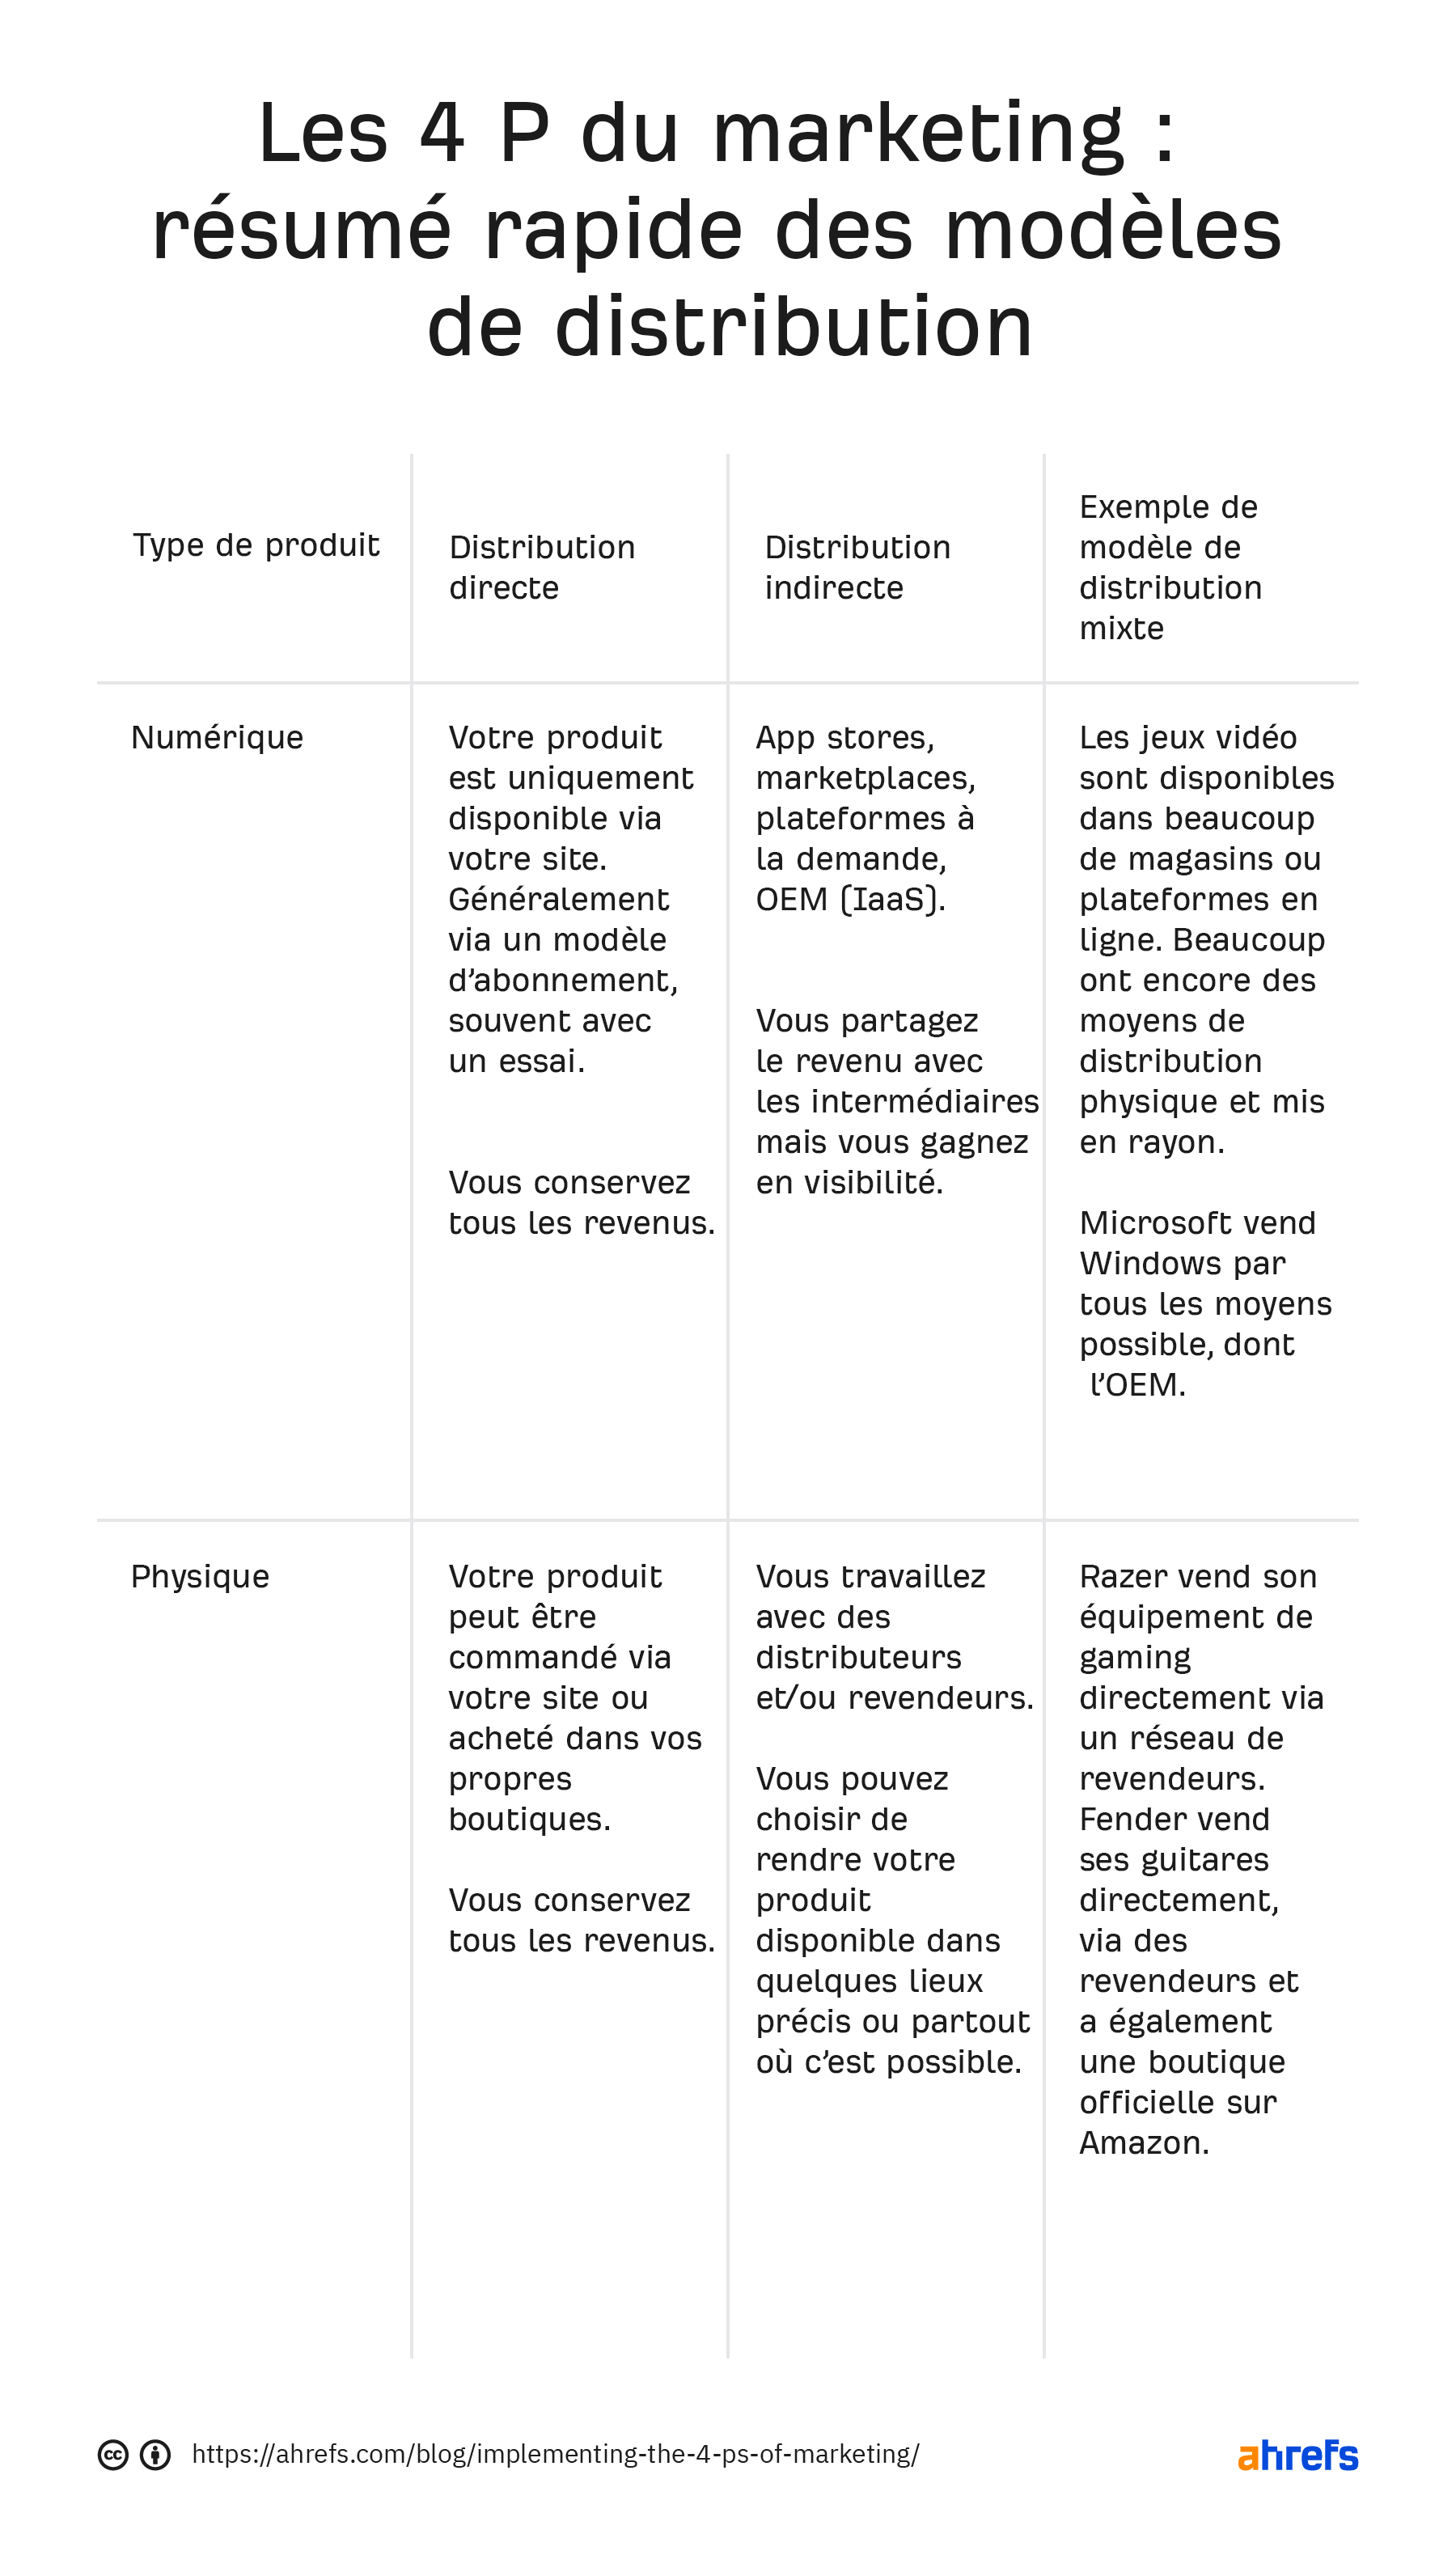 4 Ps of marketing: summary of distribution models. Columns are "types of product," "direct distribution," "indirect distribution," and "examples of mixed distribution models" with corresponding information below